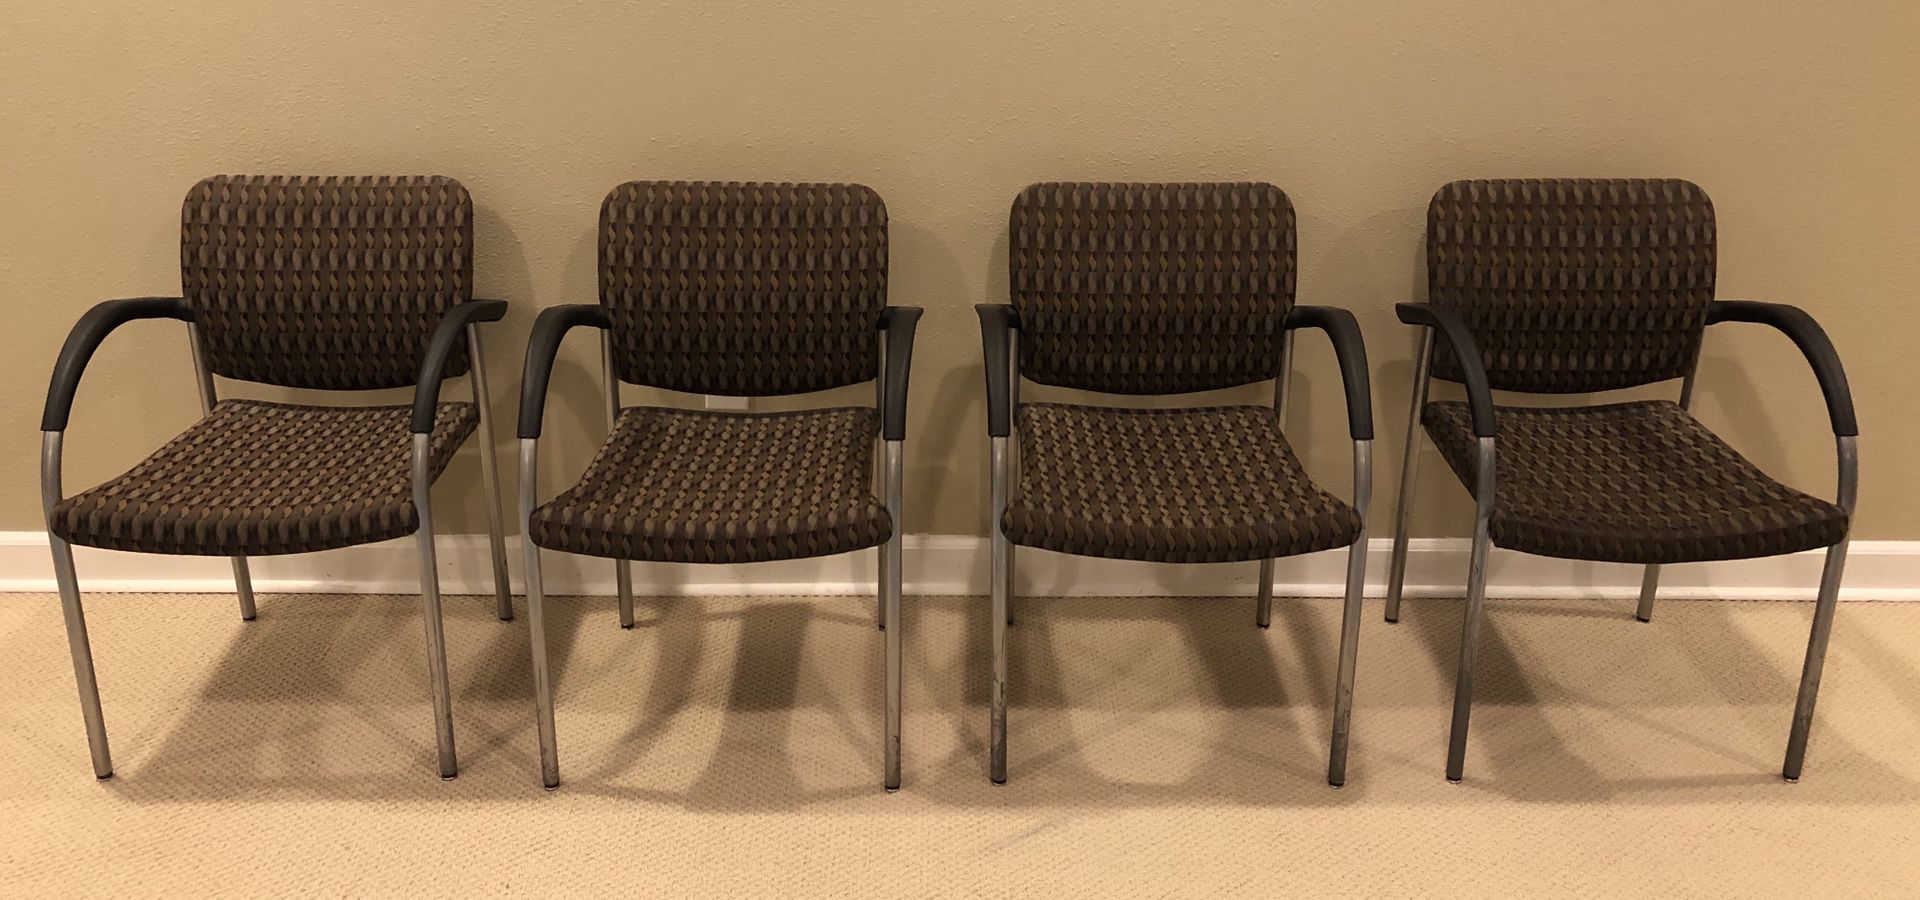 Six Conference room chairs $8 each